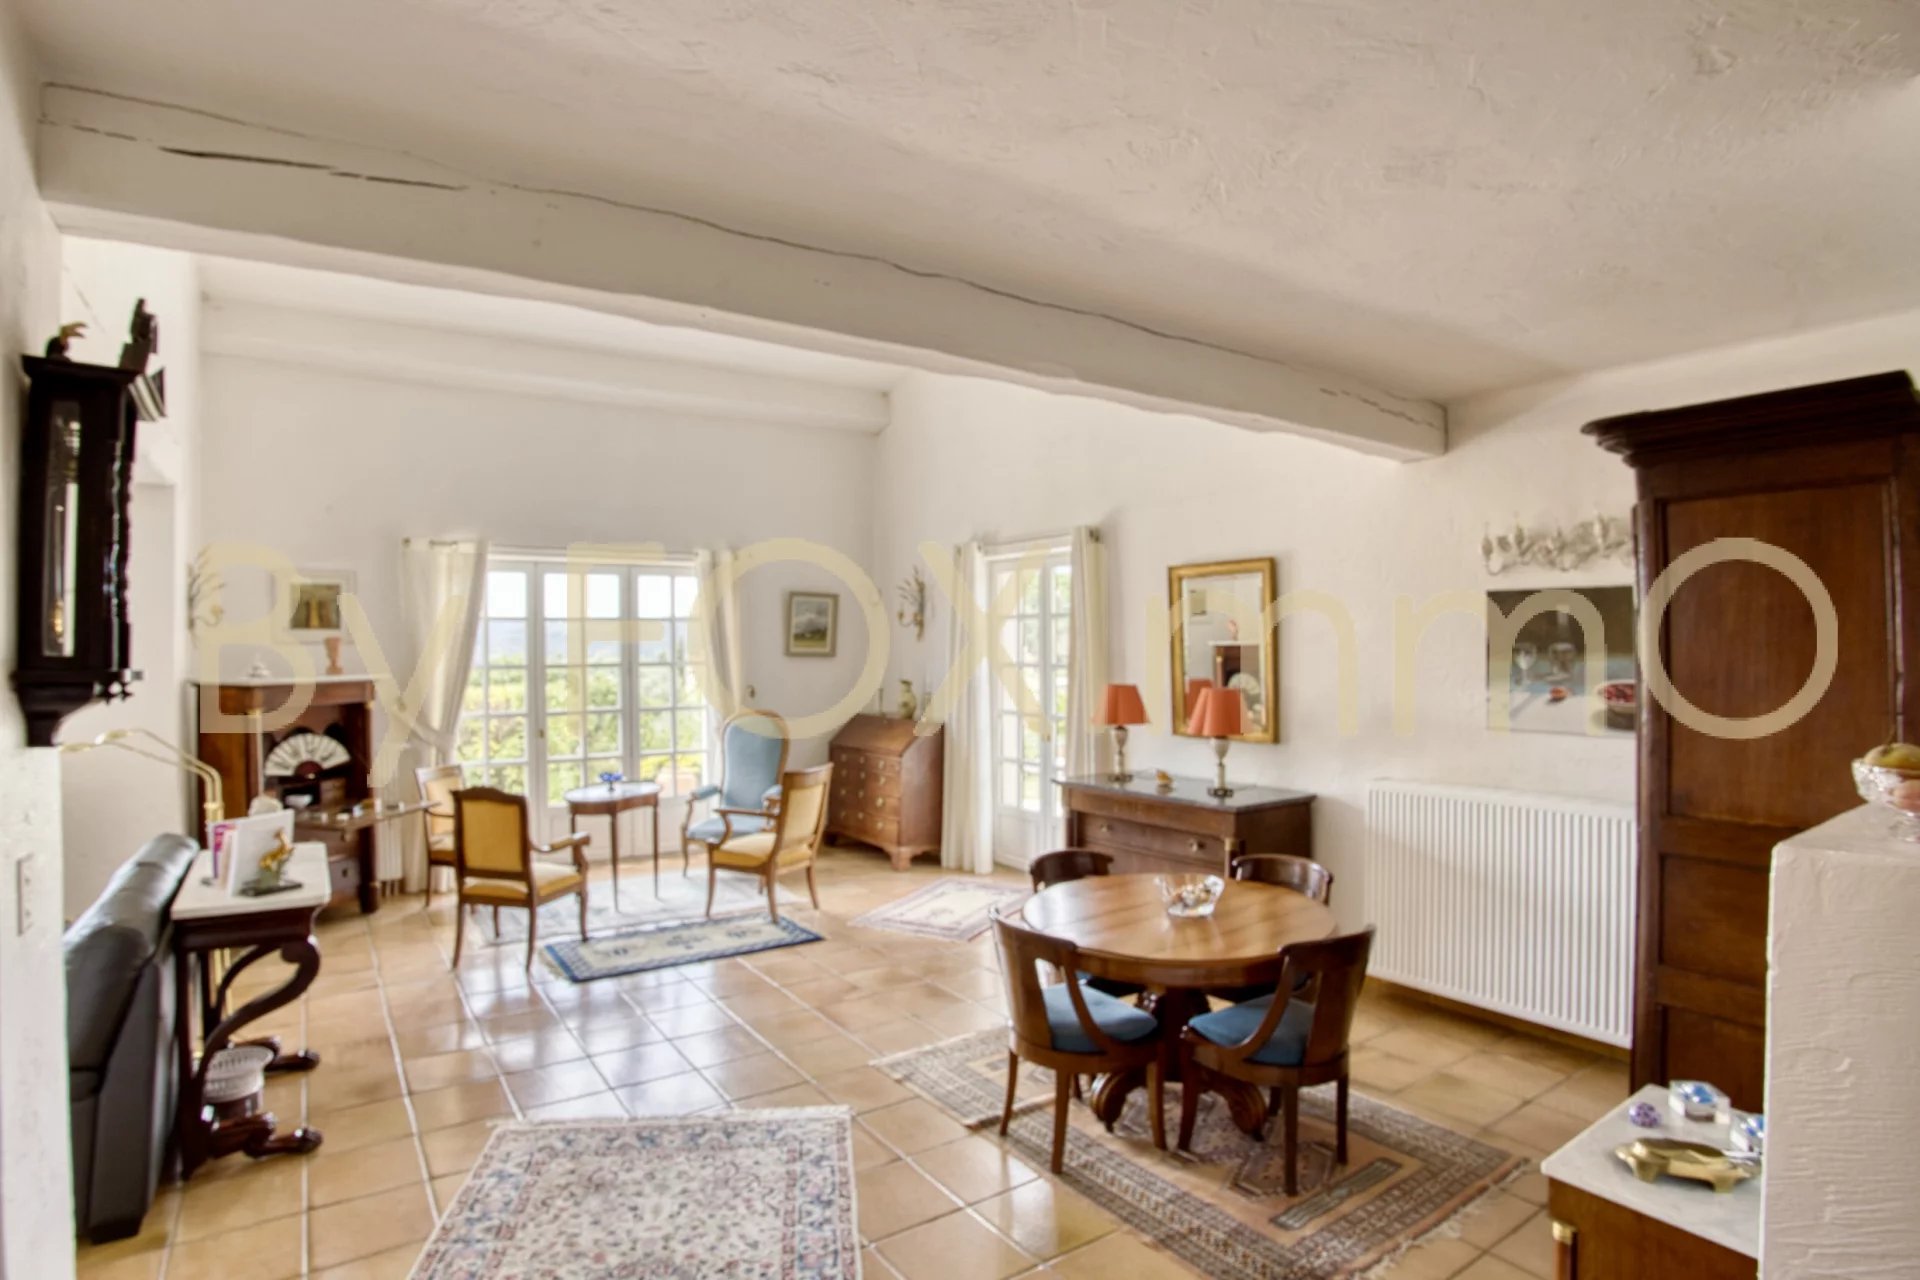 CAGNES Provencal villa 7 rooms 190m² on 1500m² of garden